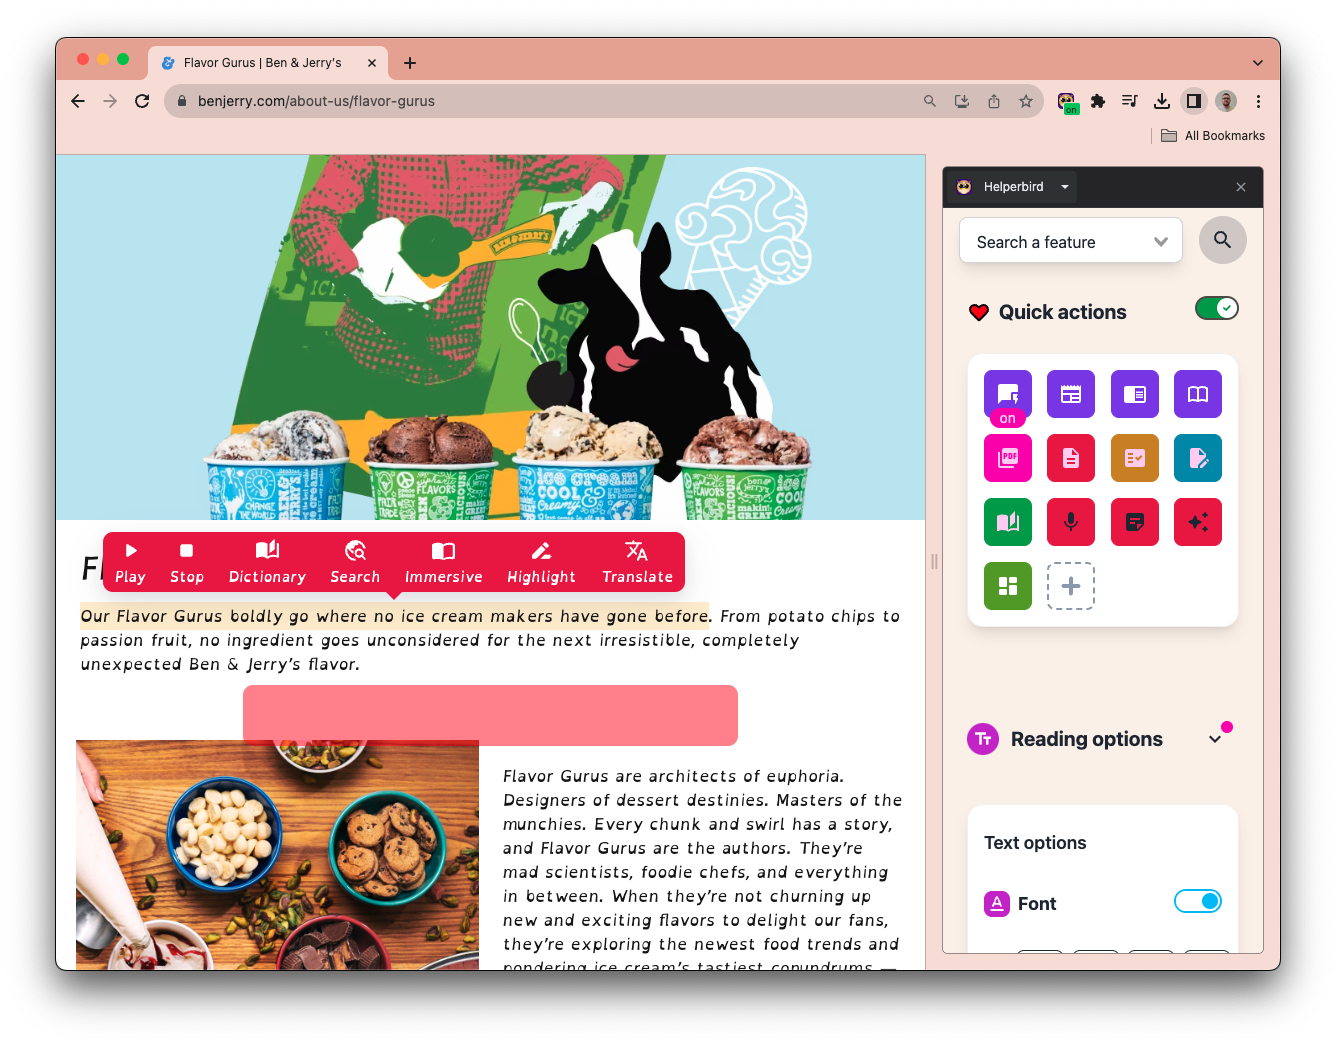 Screenshot of the Ben & Jerry's website with Helperbird features enabled. The site showcases colorful ice cream tubs and a playful design. On the left, there's a reading ruler guiding through a text about 'Flavor Gurus'. On the right side, the Helperbird overlay displays a menu with icons for features like 'Dictionary', 'Search', 'Highlight', and 'Translate'. Beneath the menu, text options are provided, including a selected 'Font' option indicating the use of the 'Lexend' font.